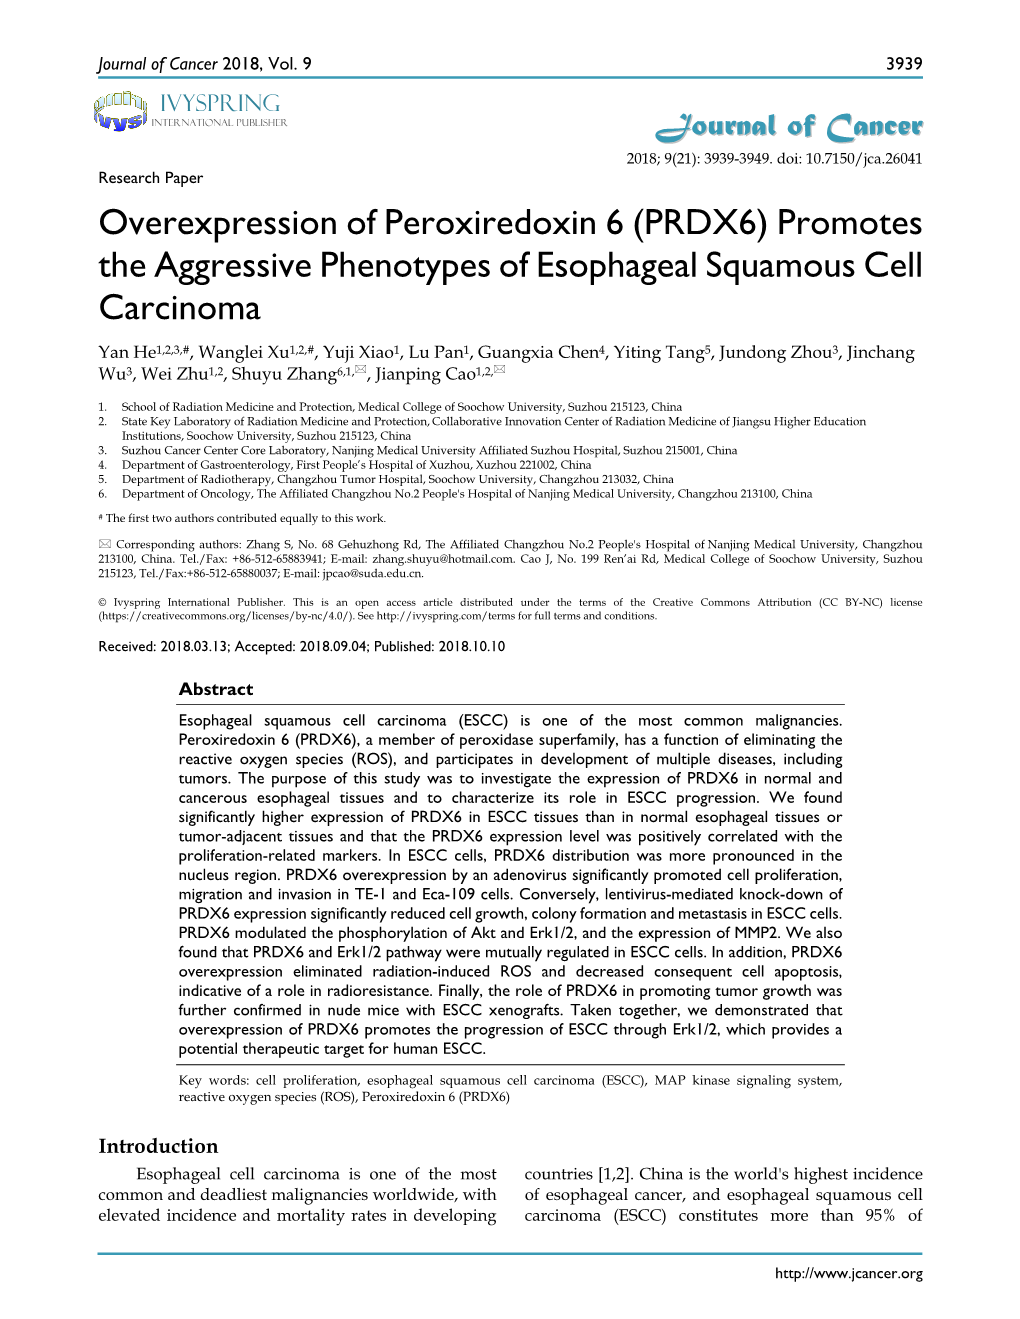 Overexpression of Peroxiredoxin 6 (PRDX6) Promotes the Aggressive